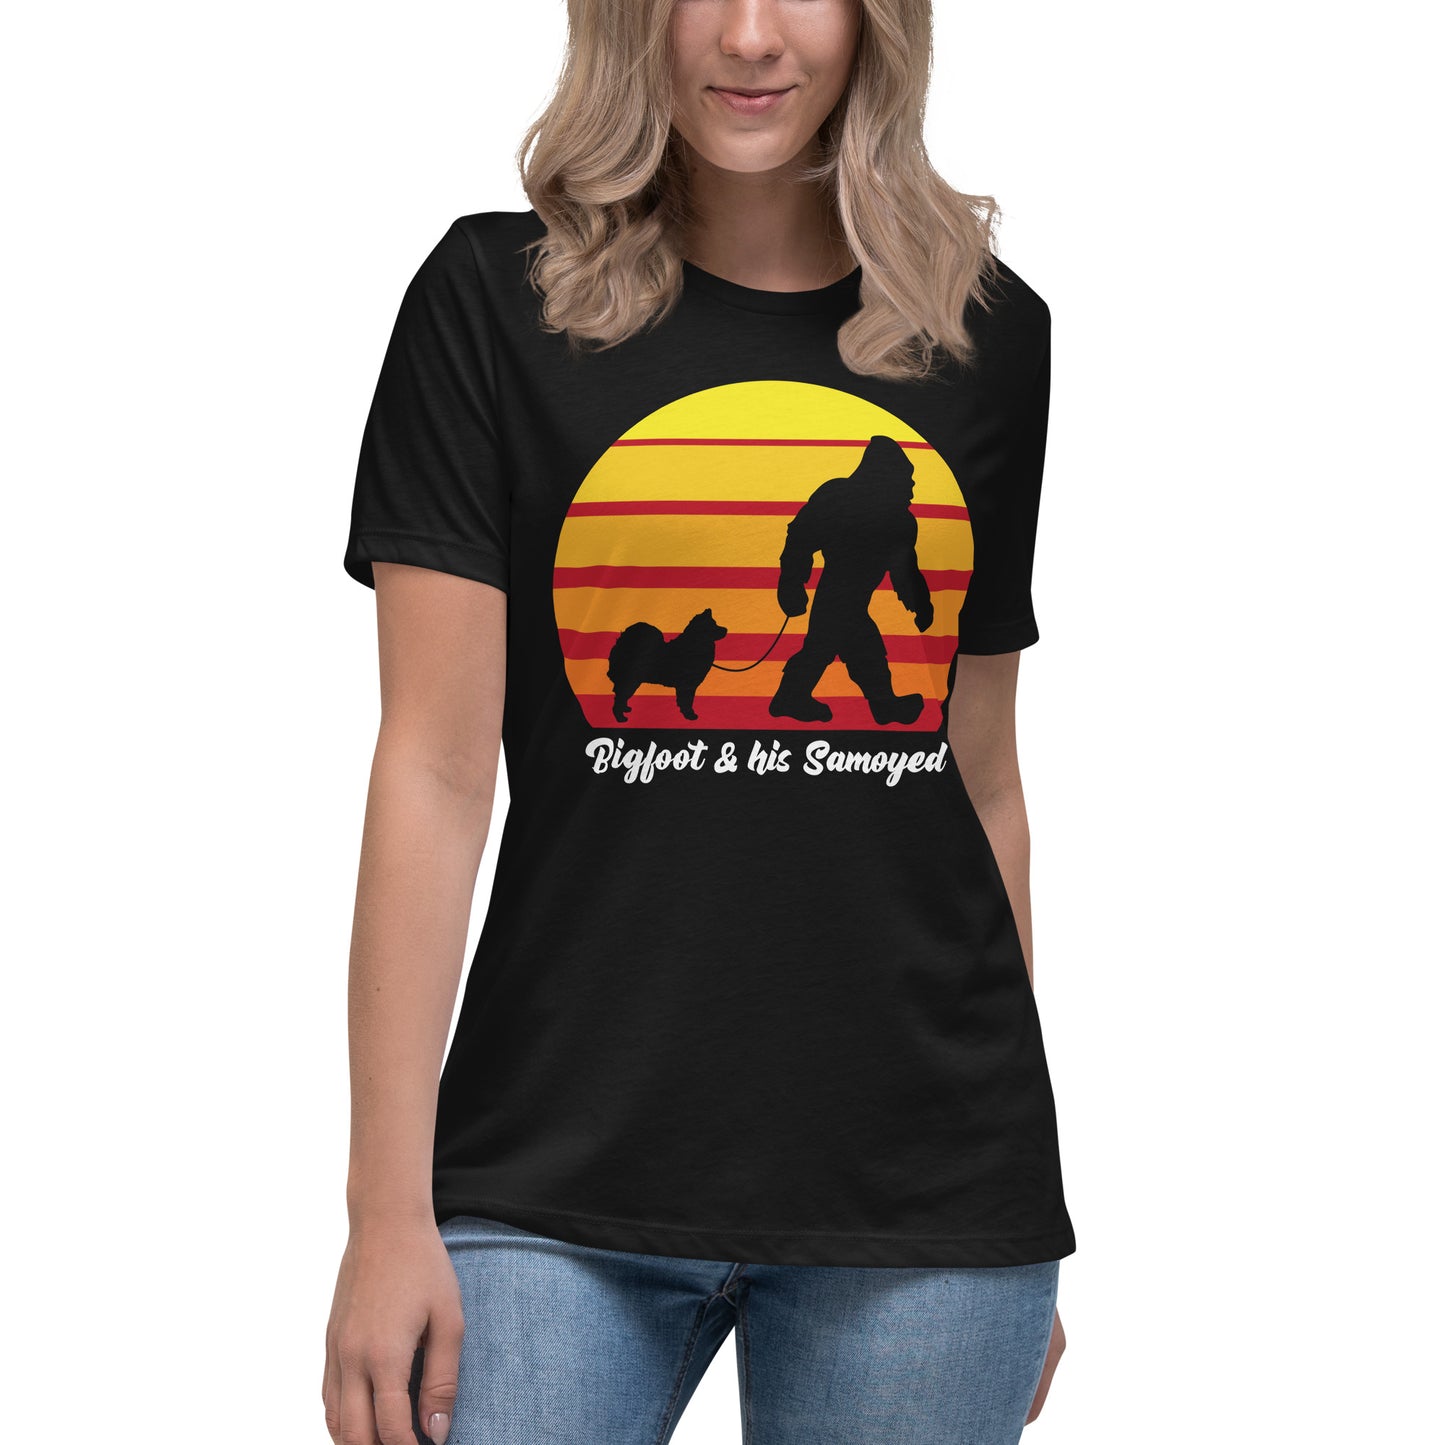 Bigfoot and his Samoyed women’s black t-shirt by Dog Artistry.